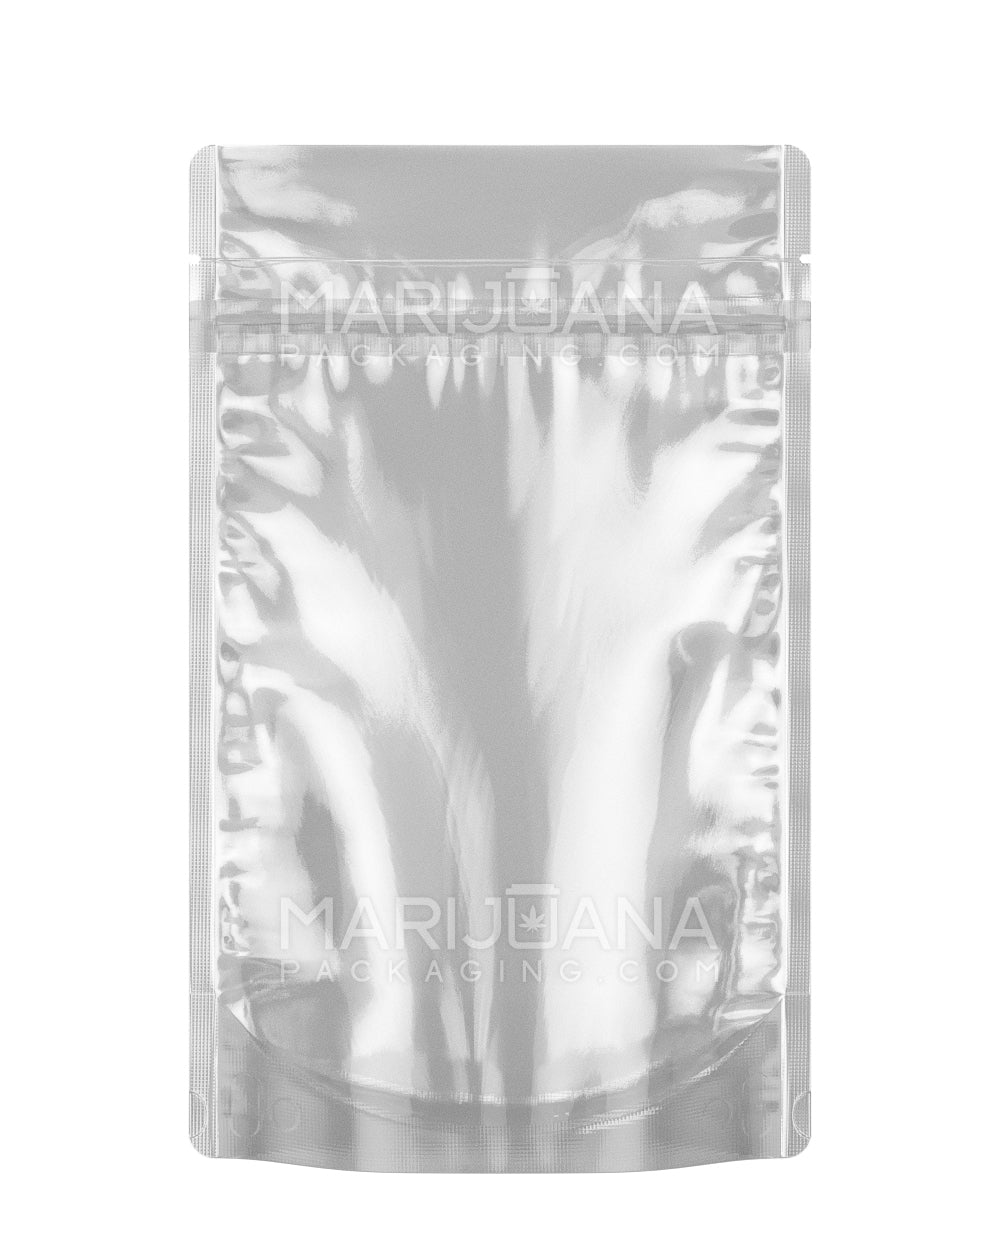 Tamper Evident | Glossy White Vista Mylar Bags (Tear Notch) | 3in x 4.5in - 1g - 1000 Count